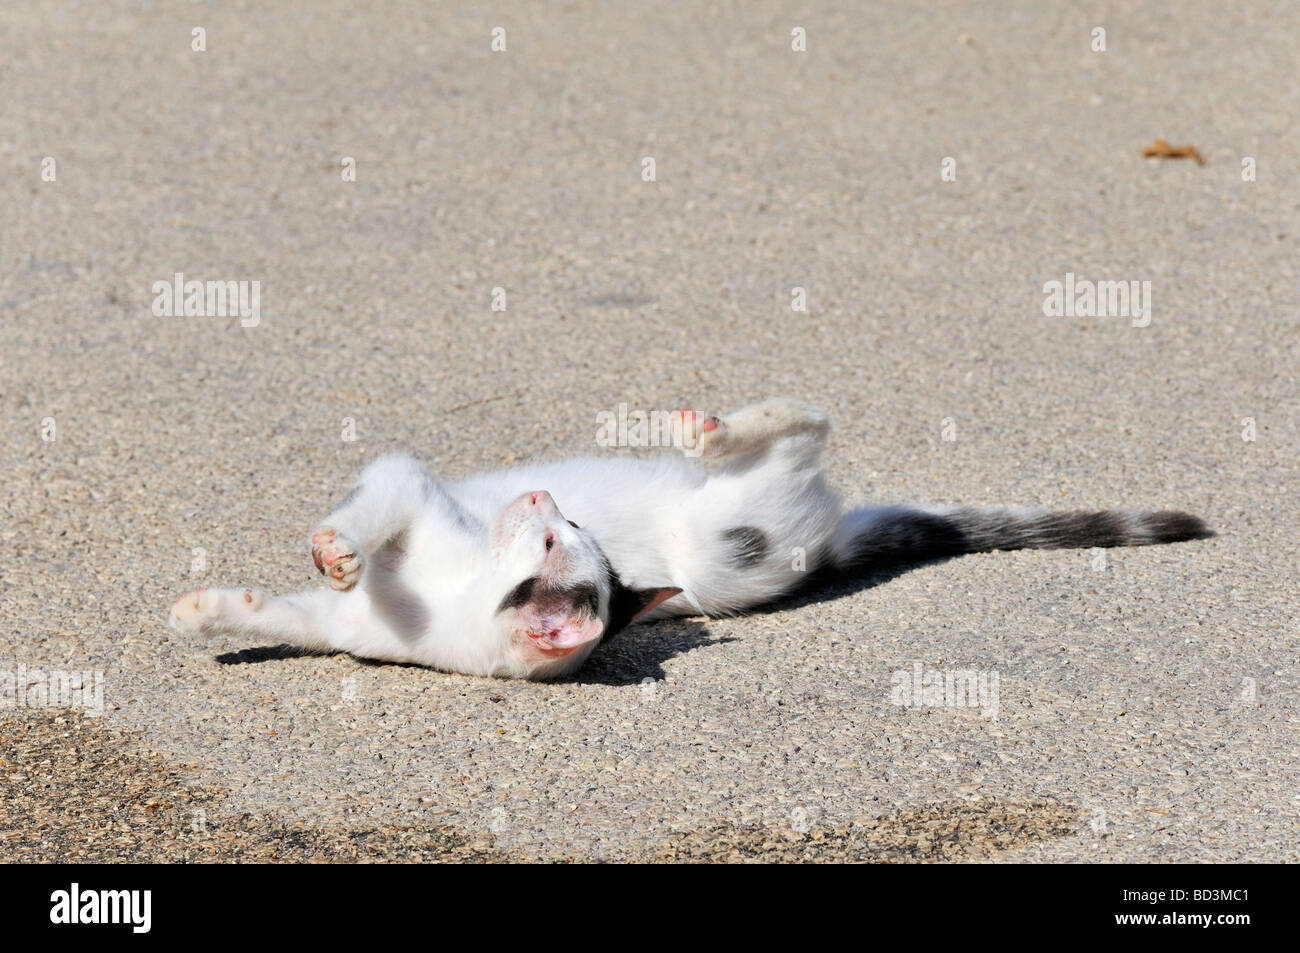 Little Greek cat suffering from a disease at the eyes Stock Photo